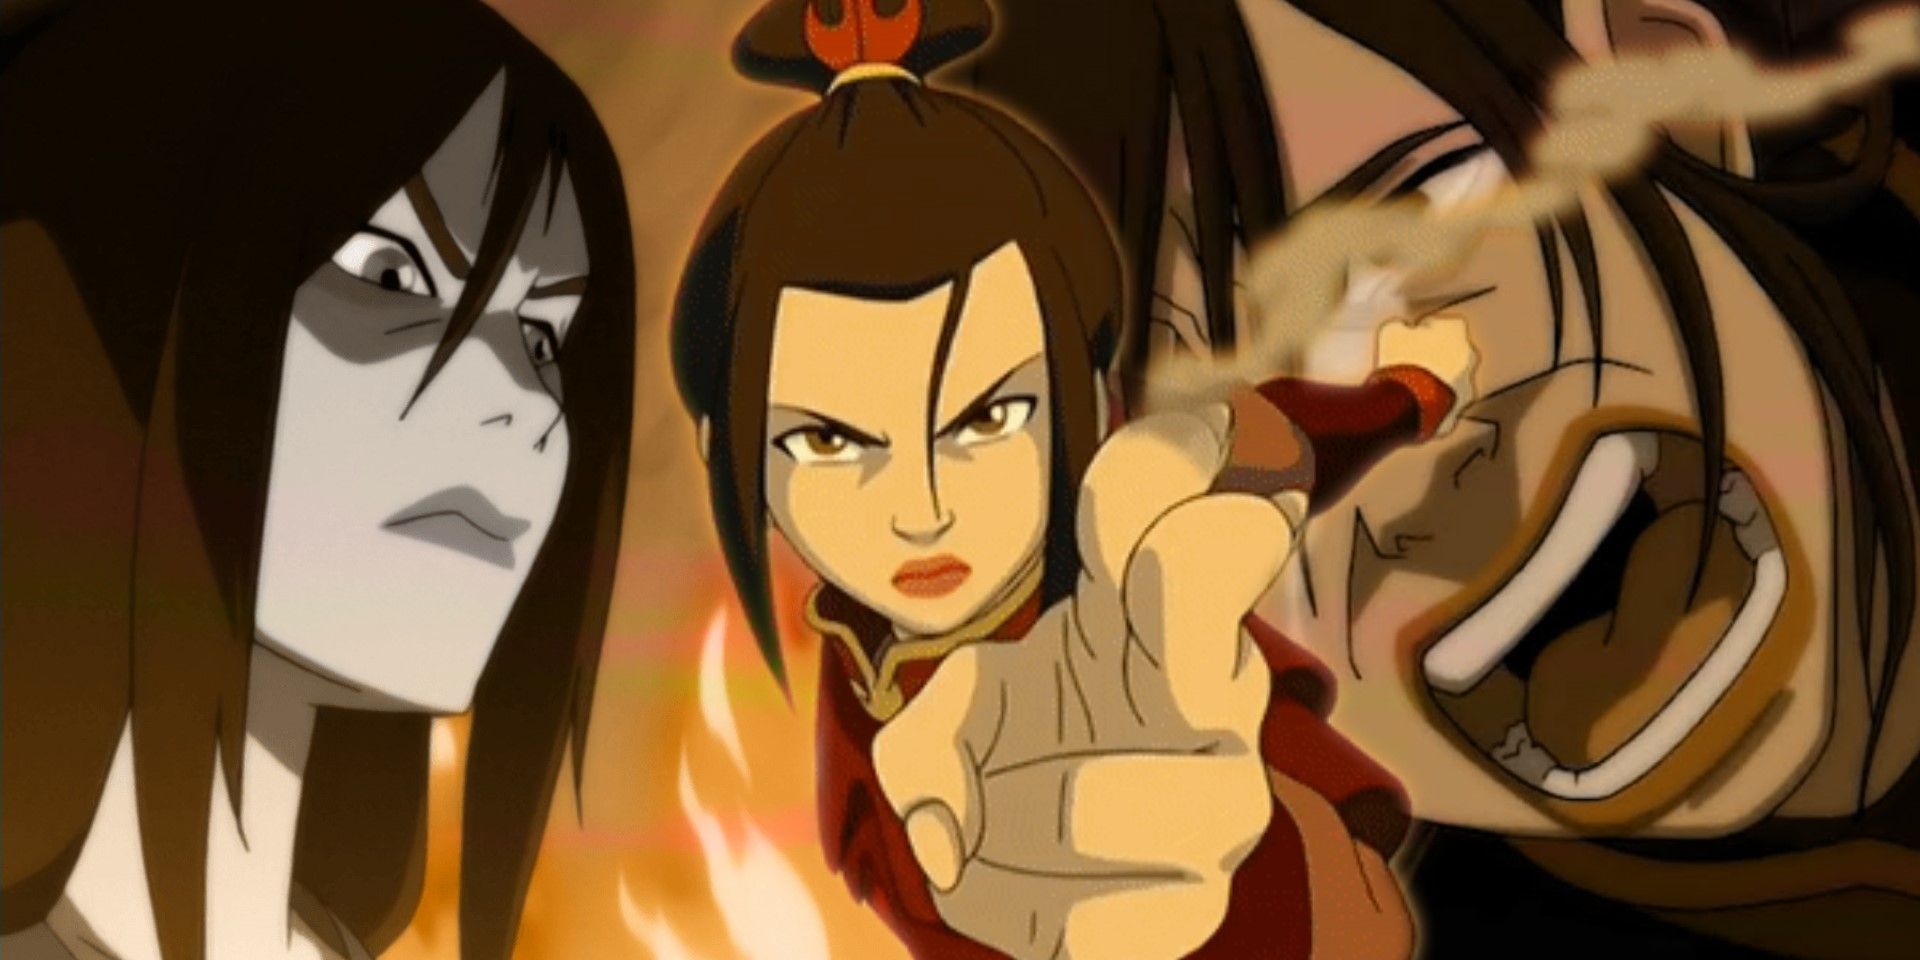 Perfection ruined Azula in Avatar: The Last Airbender.